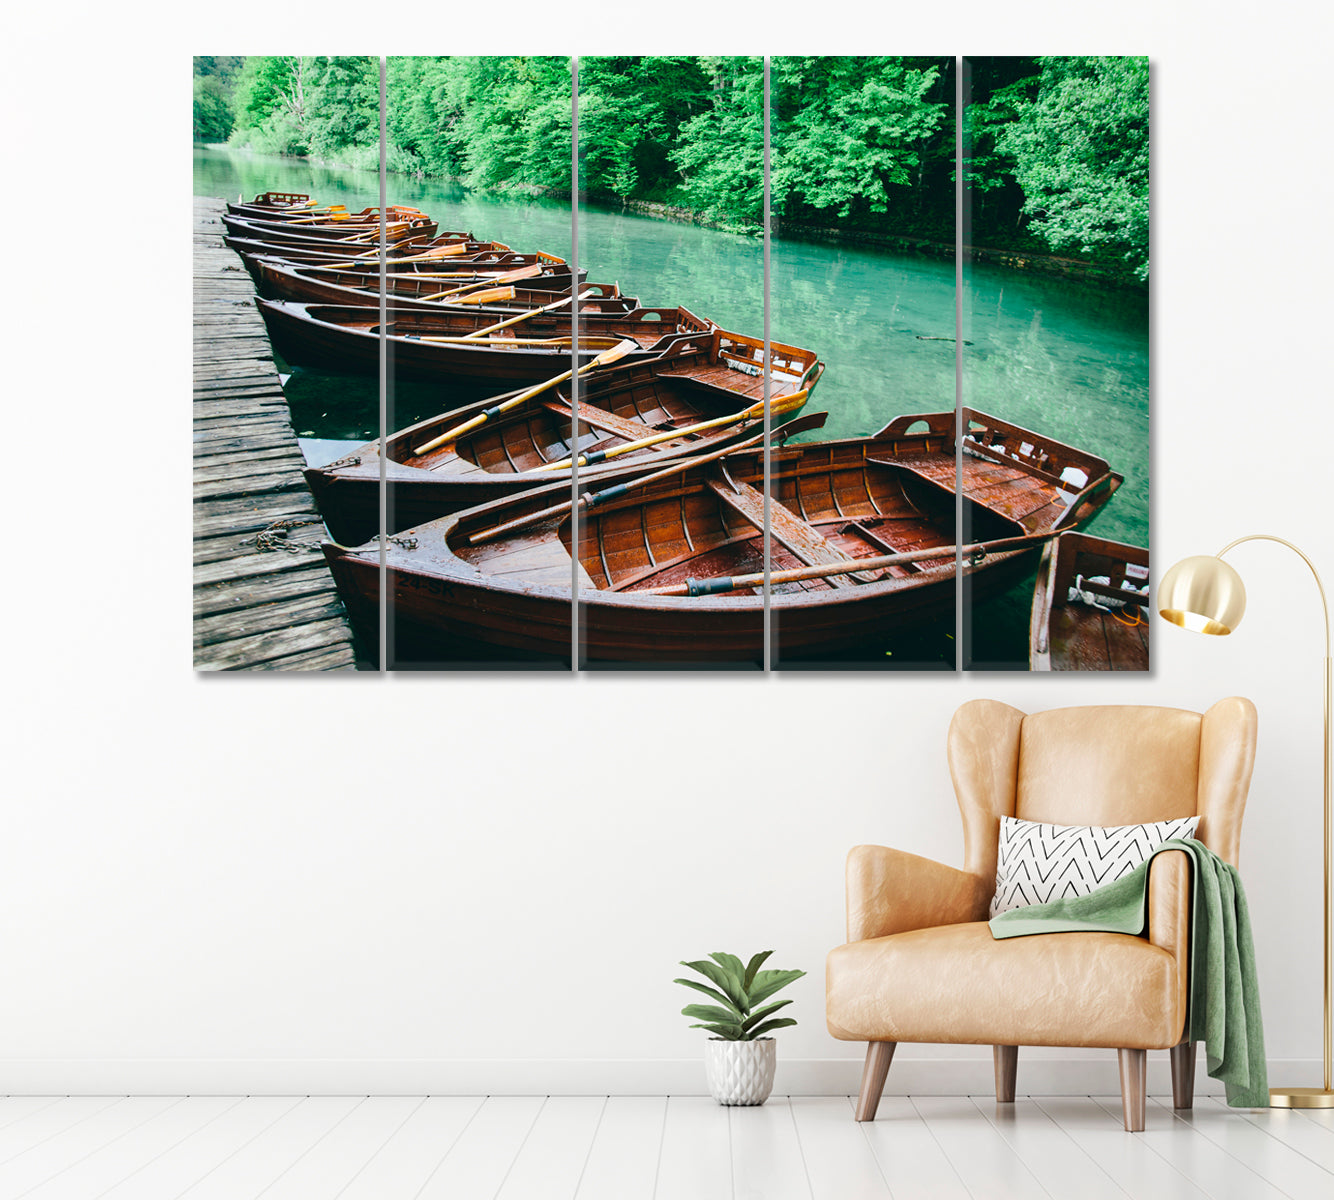 Wooden Boats in Plitvice Lakes National Park Croatia Canvas Print ArtLexy 5 Panels 36"x24" inches 